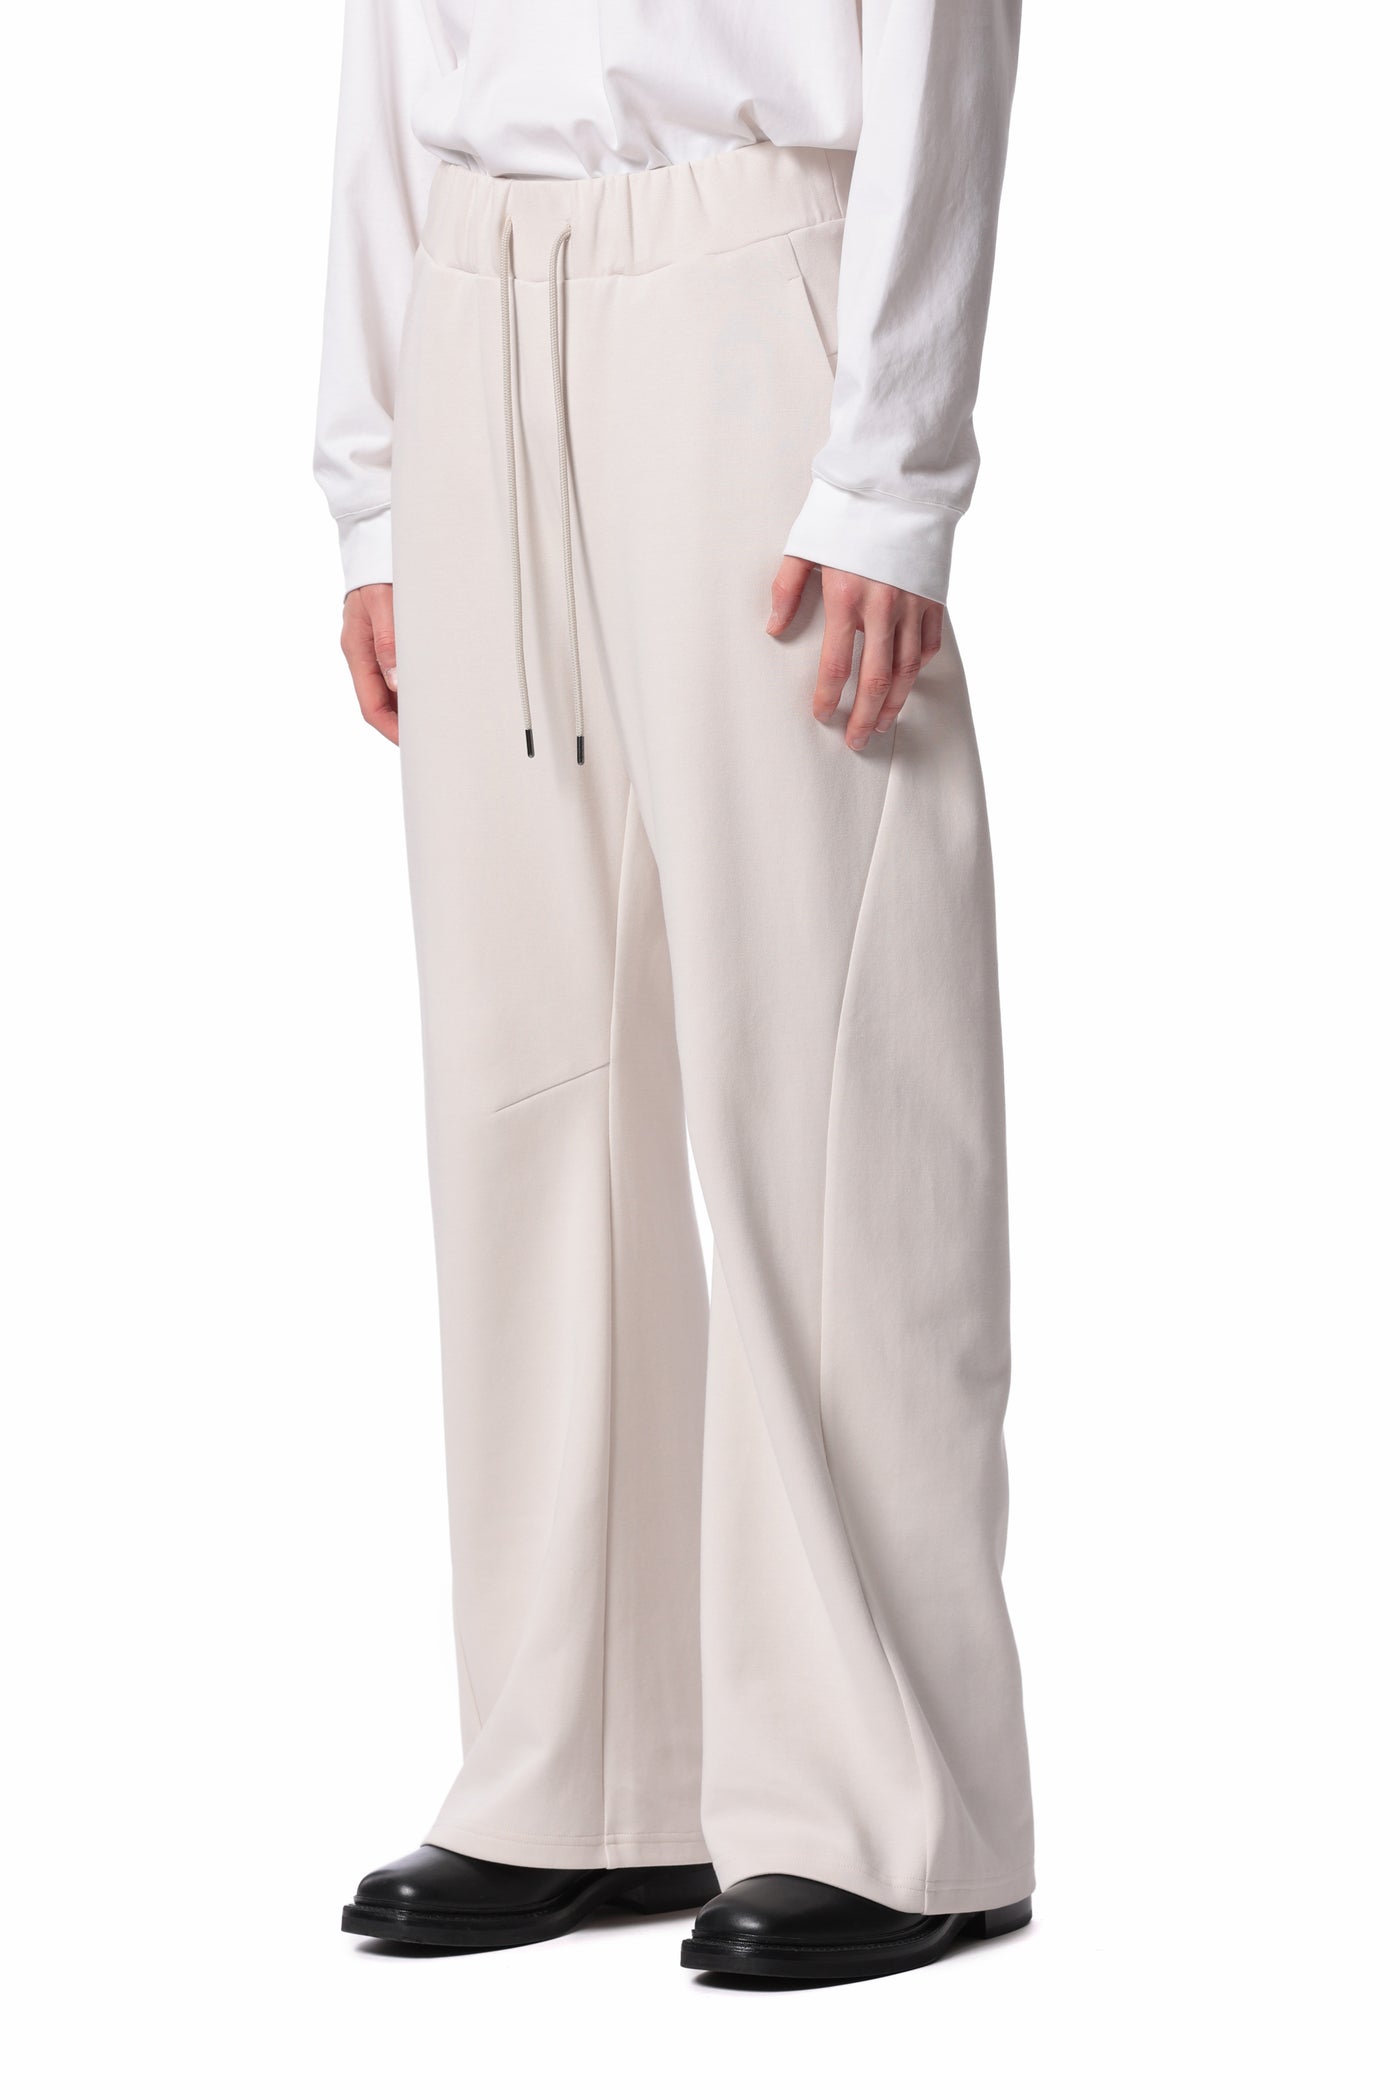 Released in February AP41-011 Cotton/Polyester double knit 3D wide pants